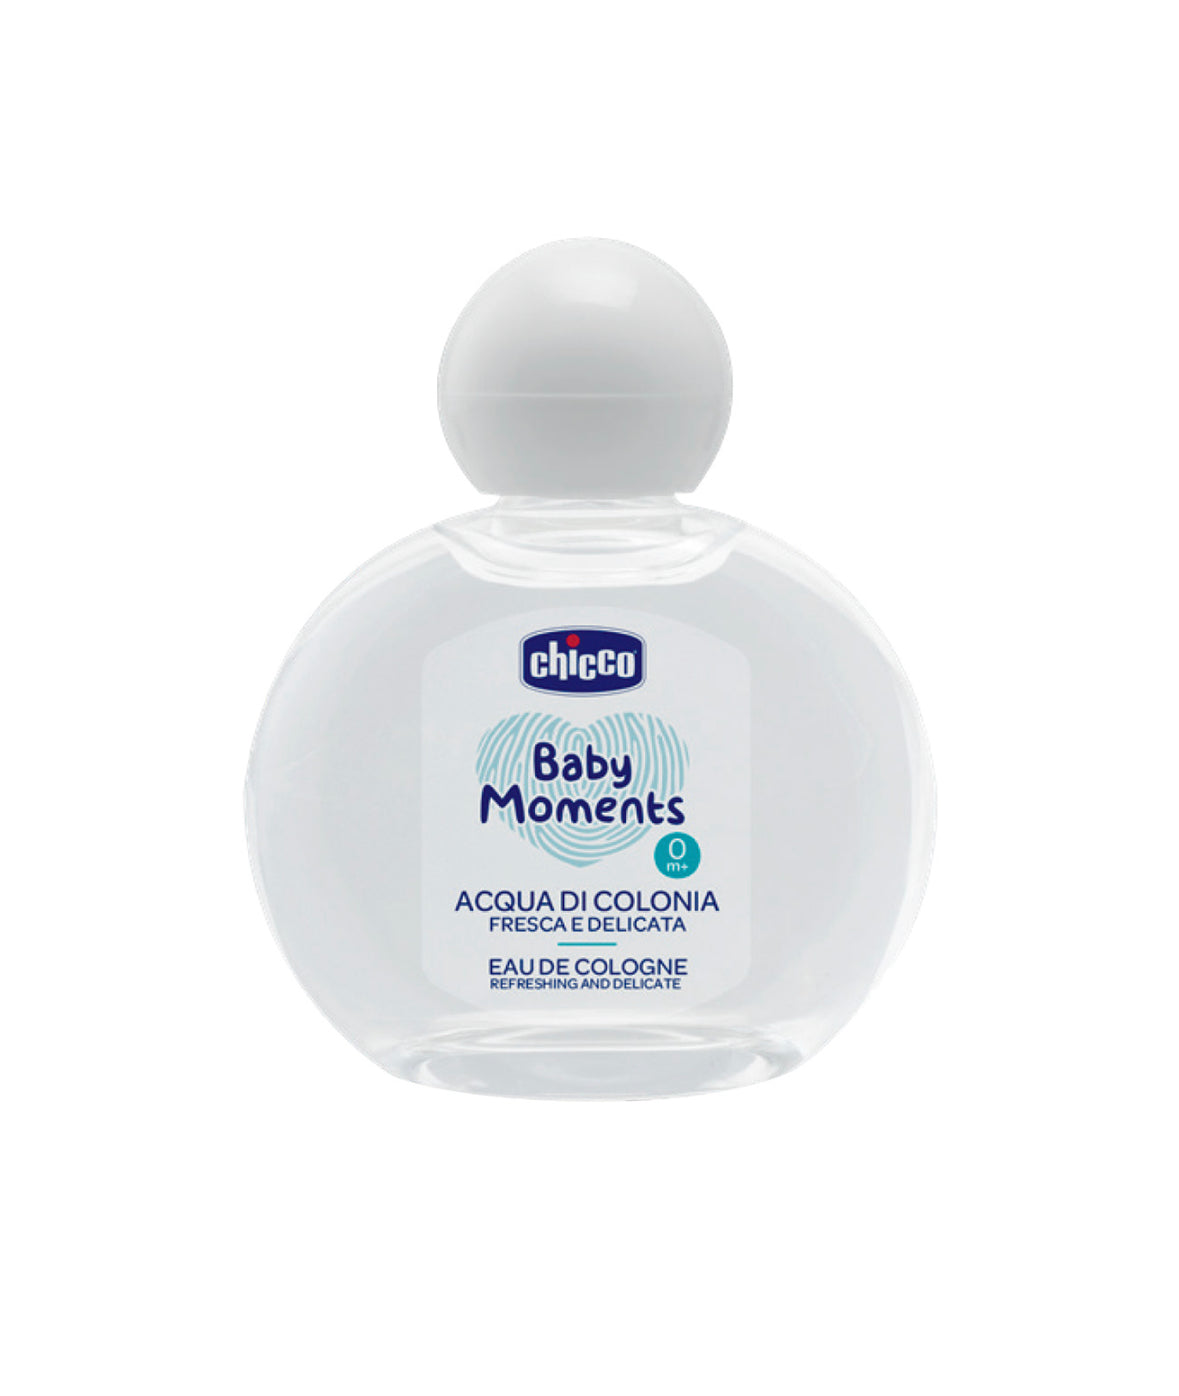 Chicco - Baby Moments EDC Refreshing And Delicate - 100ml.